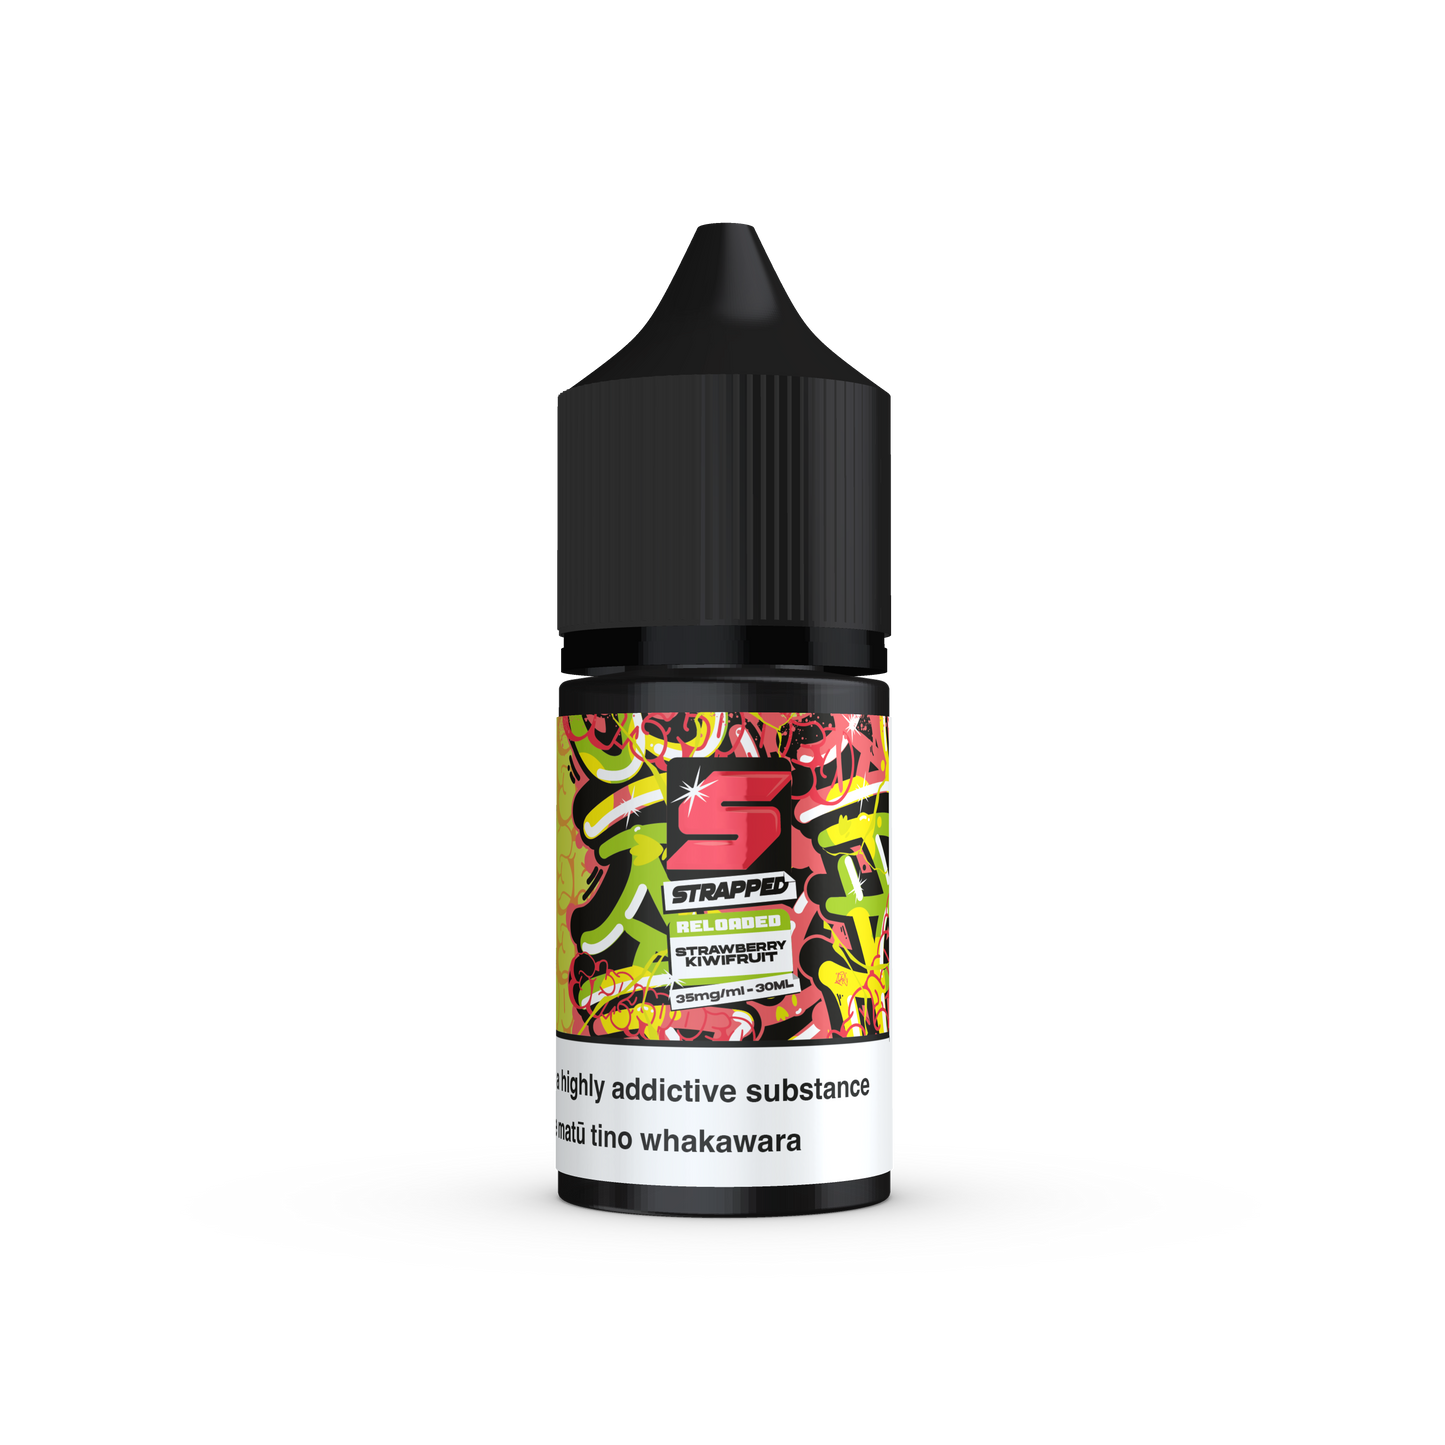 Strapped Reloaded Salts 30ml 35mg - Strawberry Kiwifruit